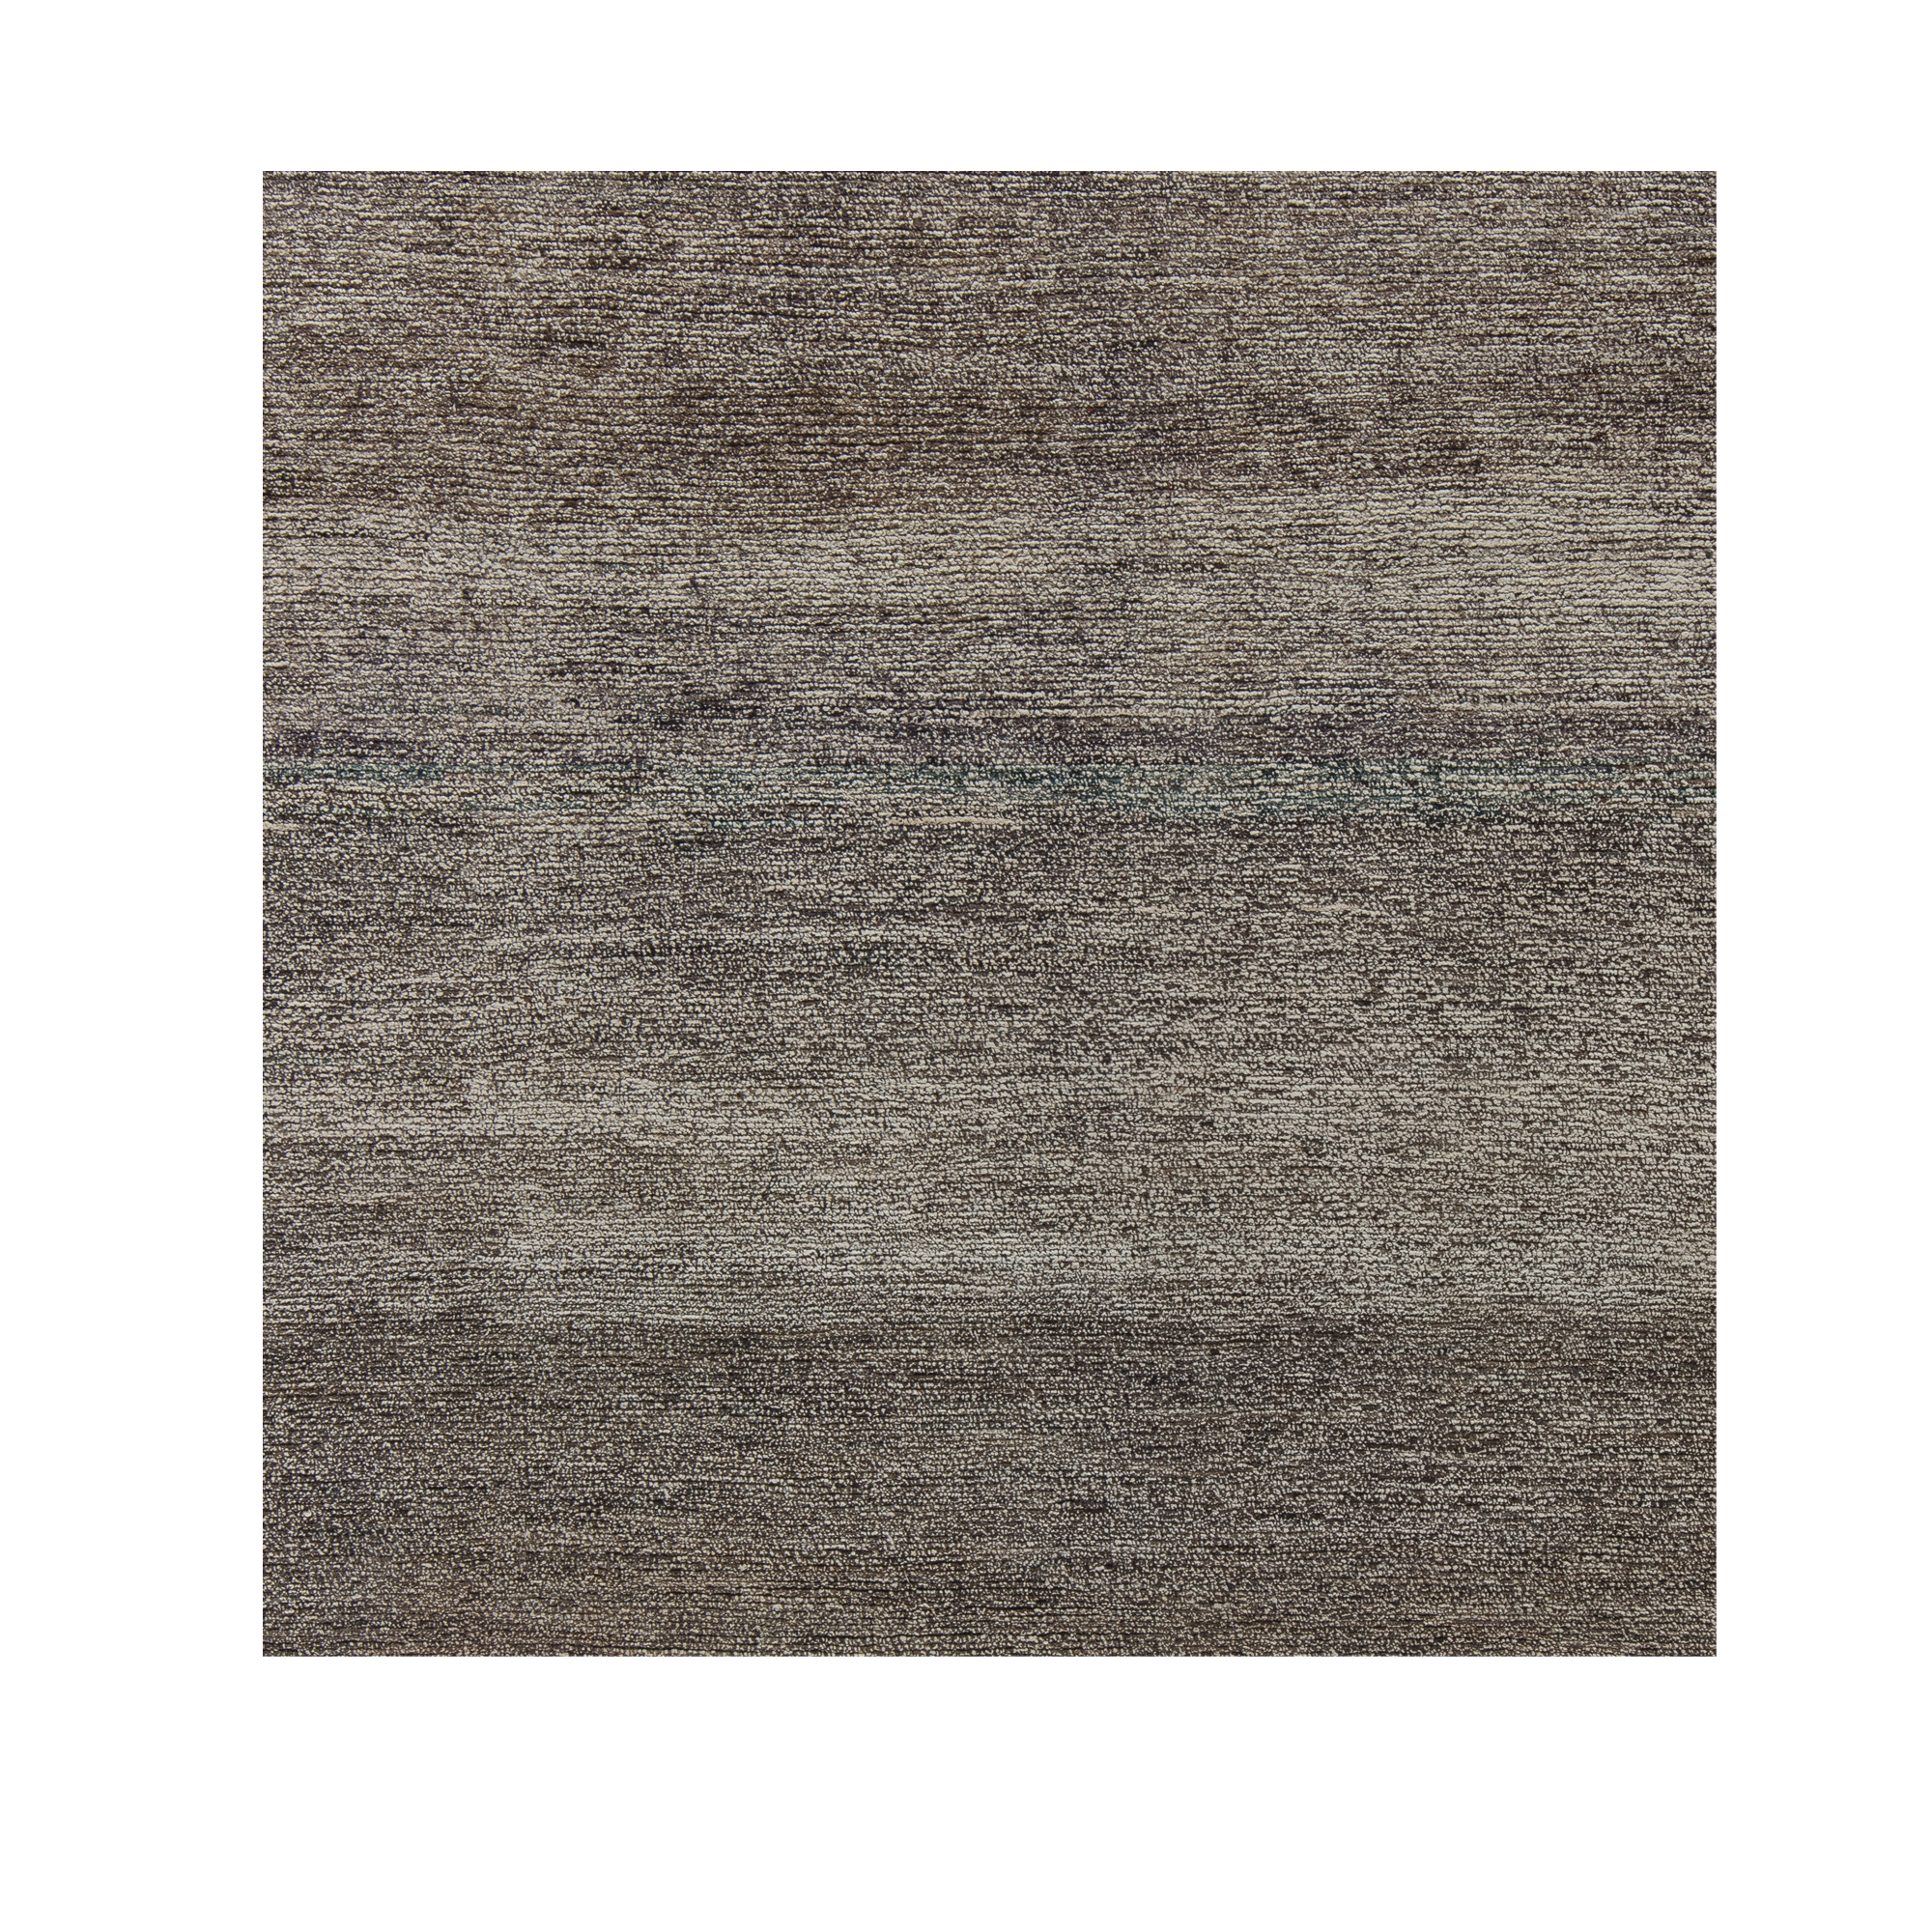 Our Patagonia rug is hand-knotted, and made from the finest hand-carded, hand-spun naturally dyed wool with silk accent.